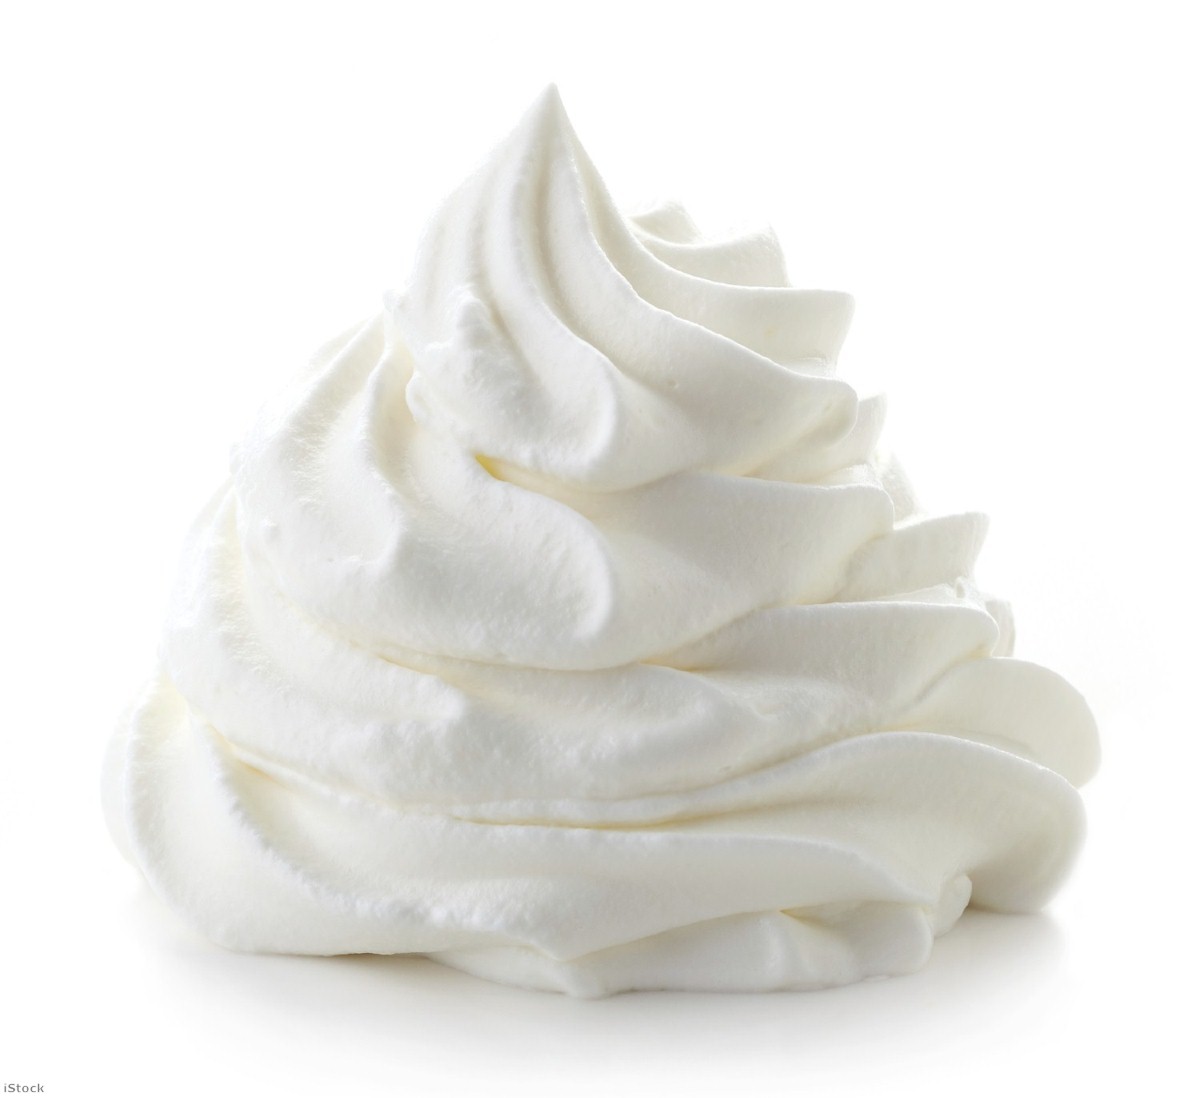 The Home Office is providing shop owners with guidance on how to sell whipped cream spray